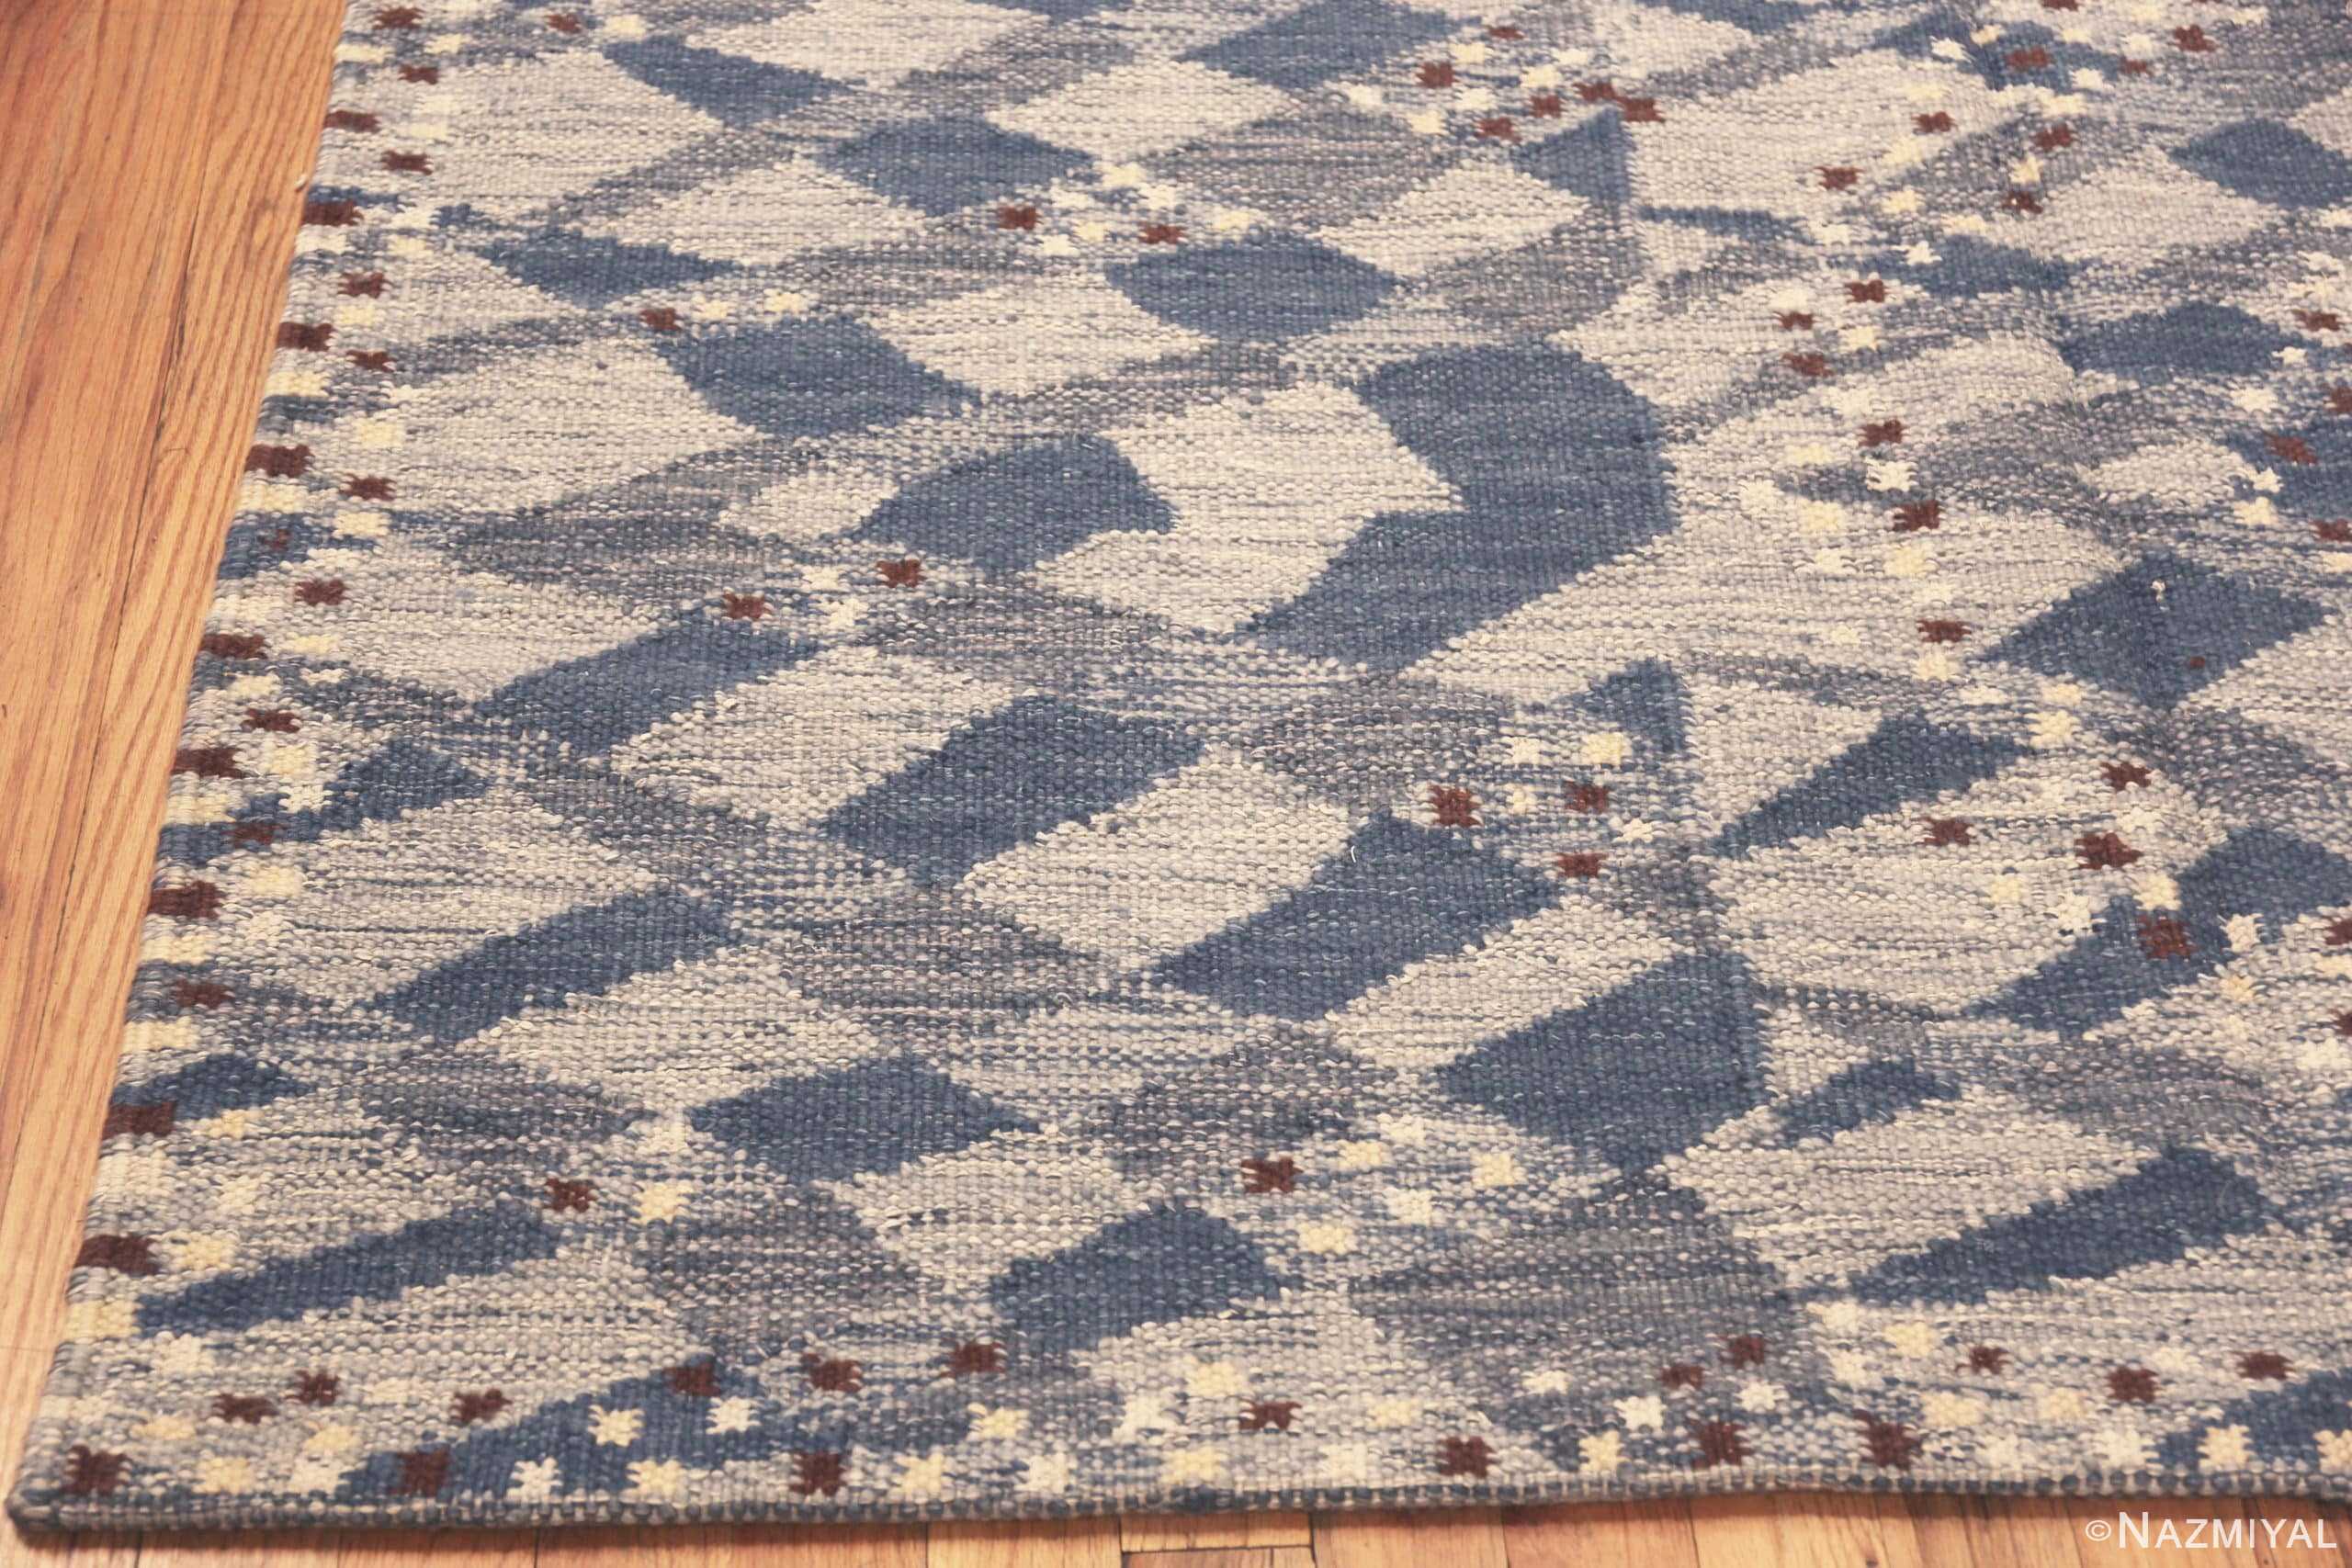 Corner Of Magnificent Swedish Inspired Blue Area Rug 60895 by Nazmiyal Antique Rugs